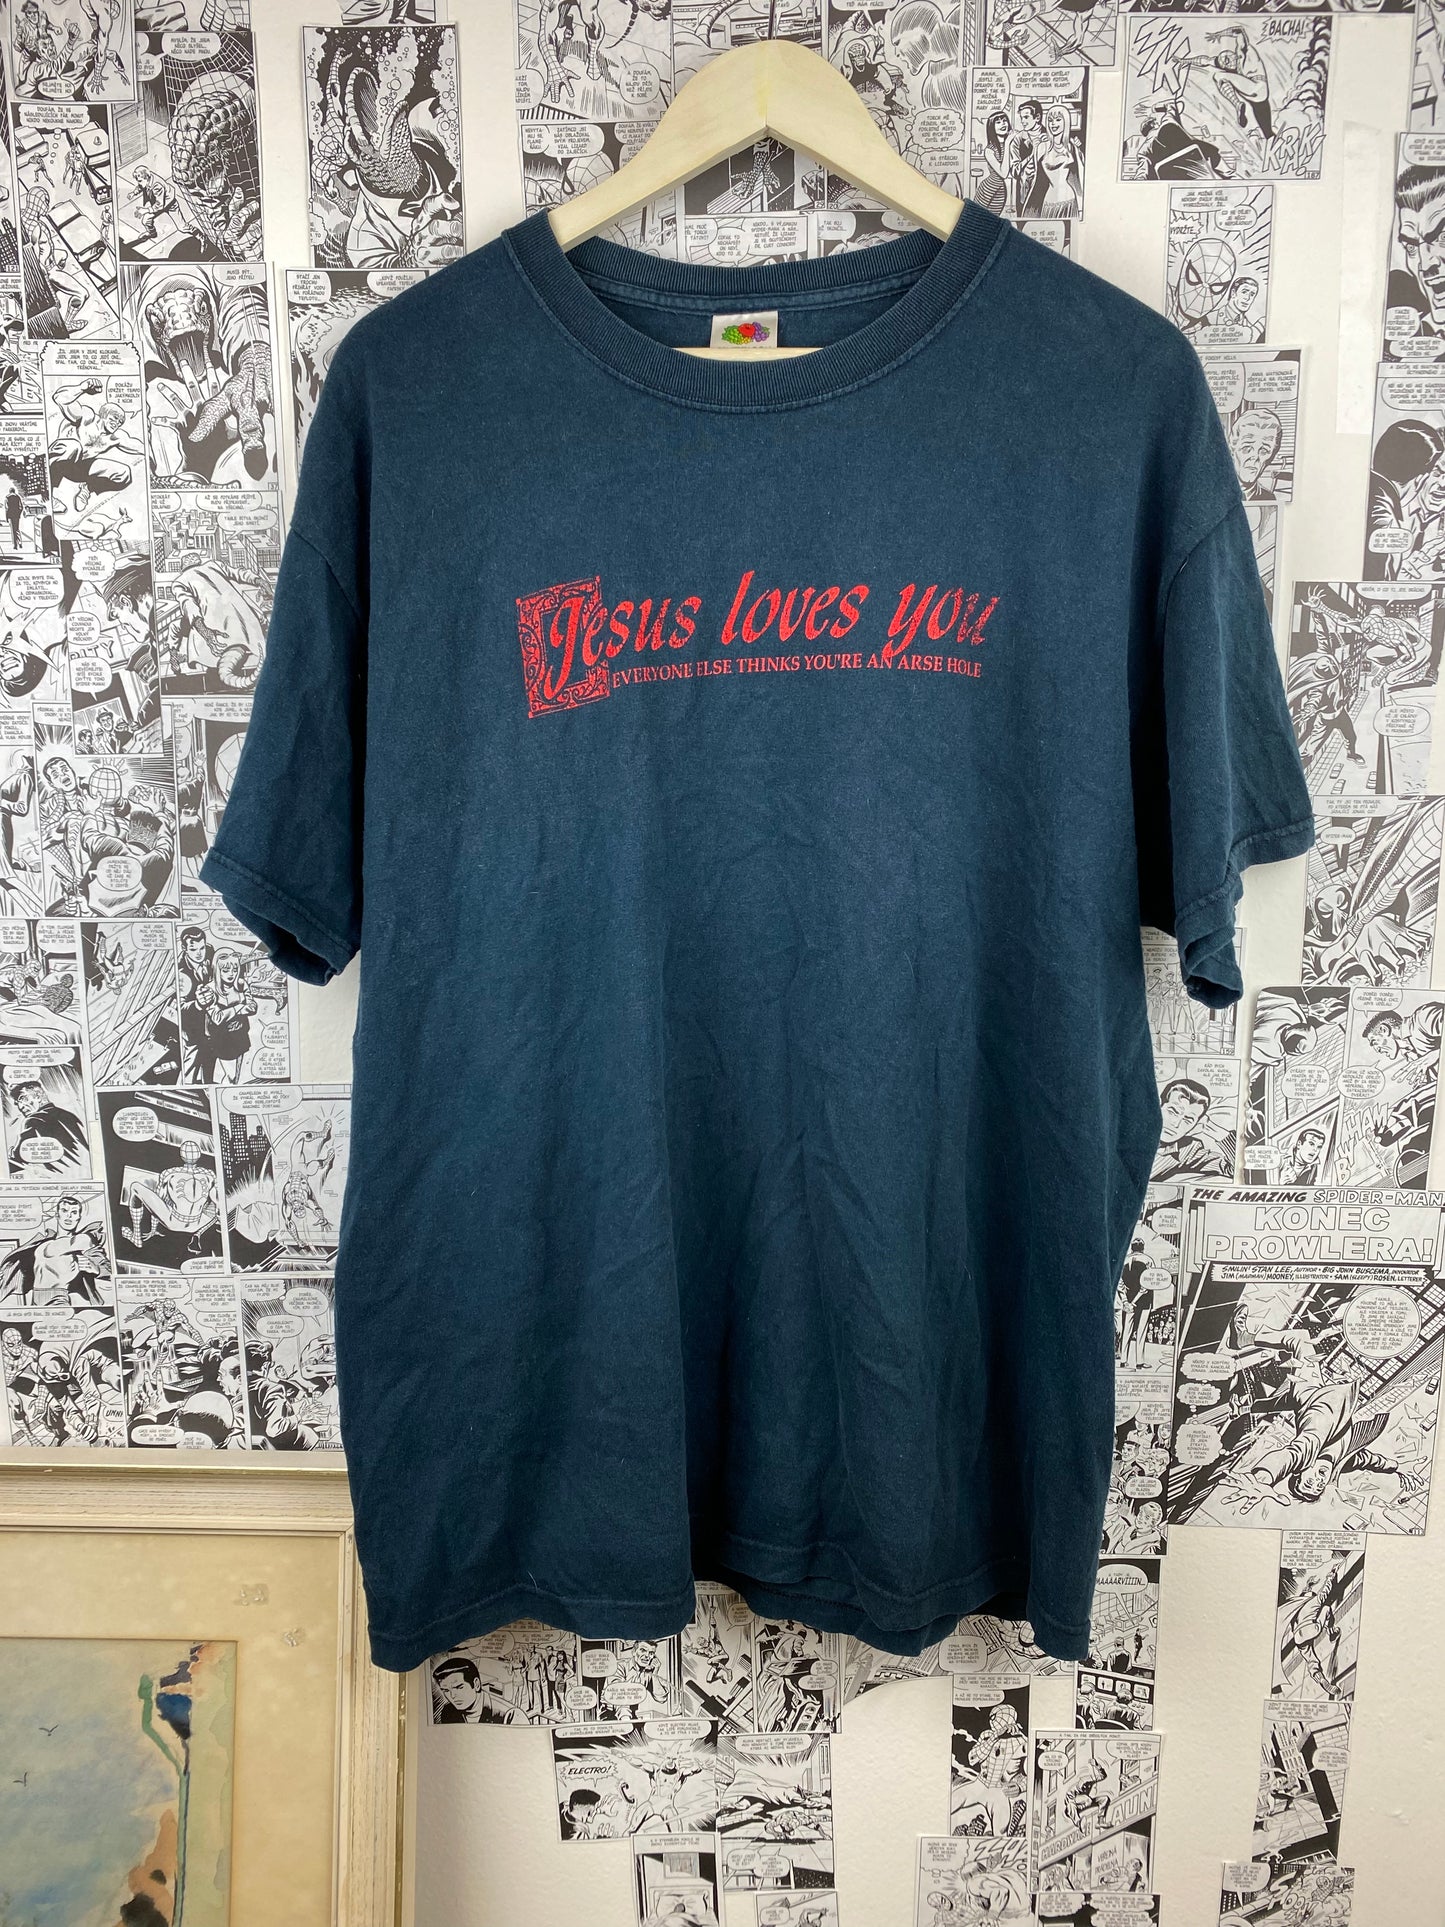 Vintage “Jesus Loves you” Funny 90s Quote t-shirt